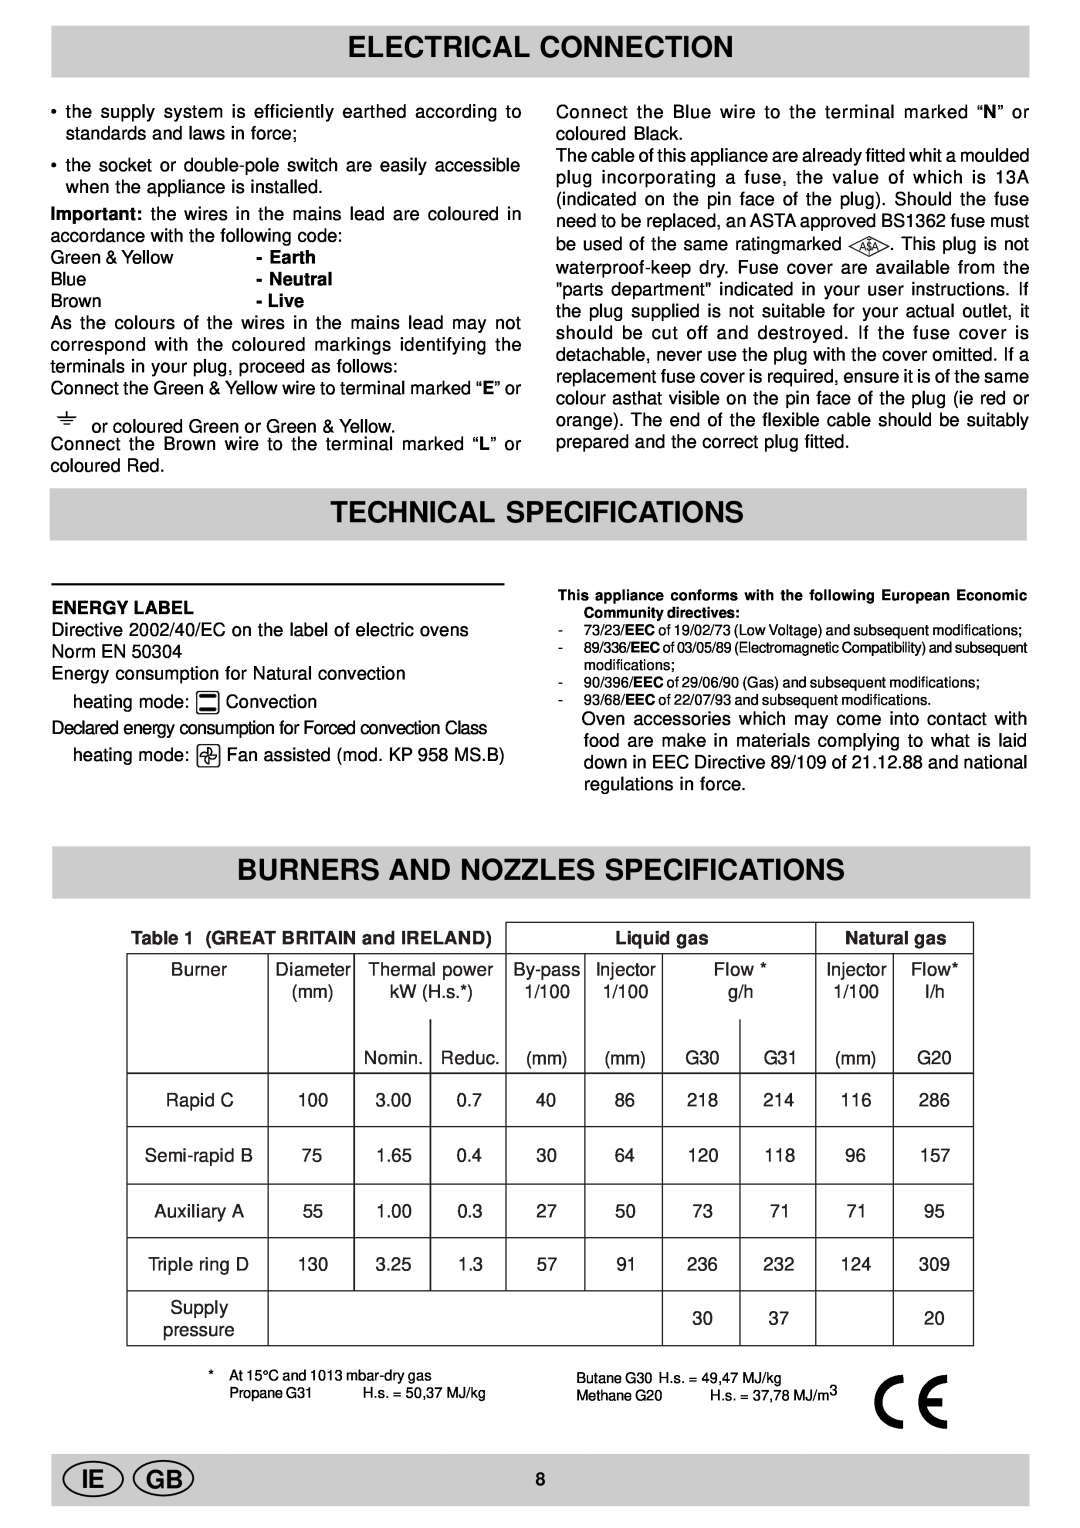 Indesit KP 958 MS.B Technical Specifications, Burners And Nozzles Specifications, Electrical Connection, Ie Gb, Liquid gas 